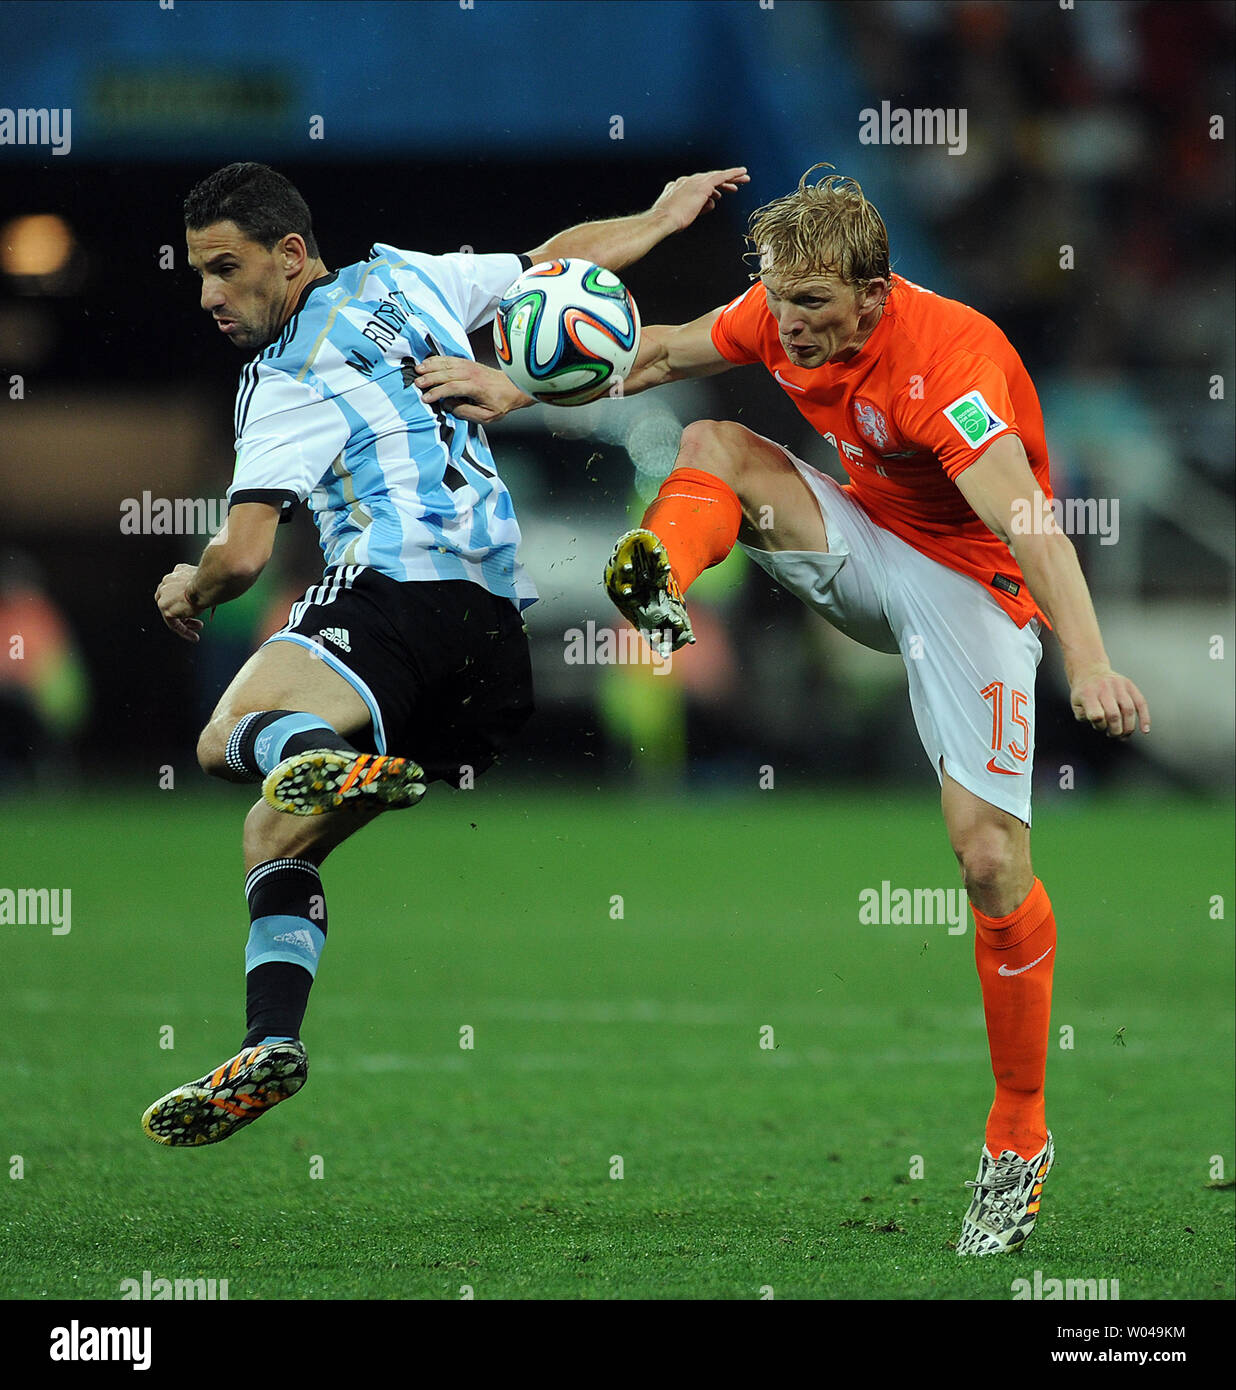 Dirk Kuyt of the Netherlands competes with Maxi Rodriguez (L) of Argentina during the 2014 FIFA World Cup Semi Final match at the Arena Corinthians in Sao Paulo, Brazil on July 09, 2014. UPI/Chris Brunskill Stock Photo